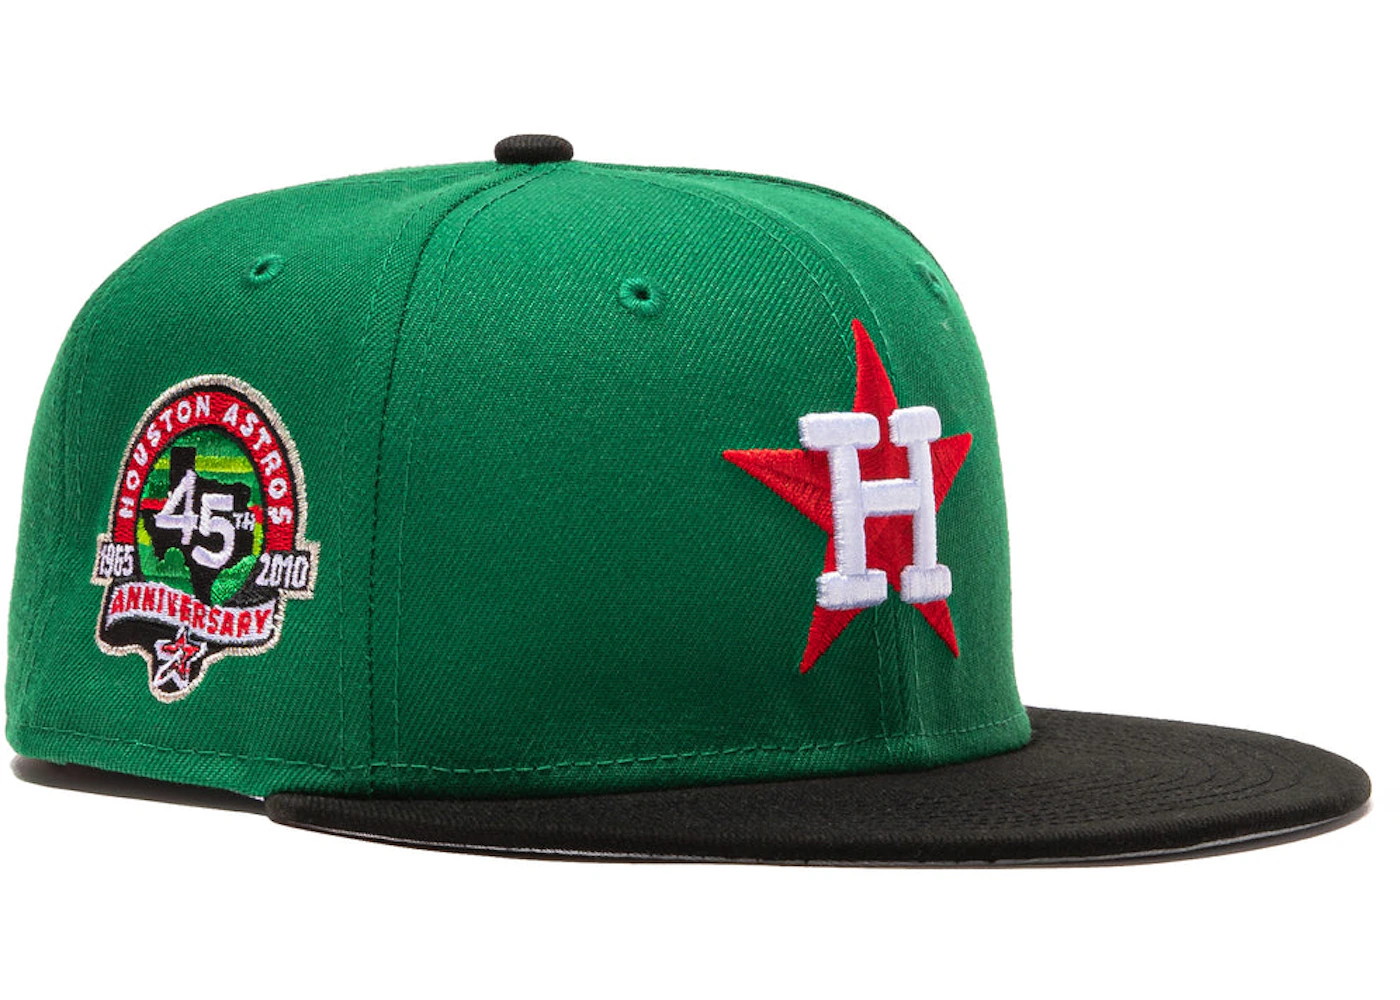 houston astros fitted hat